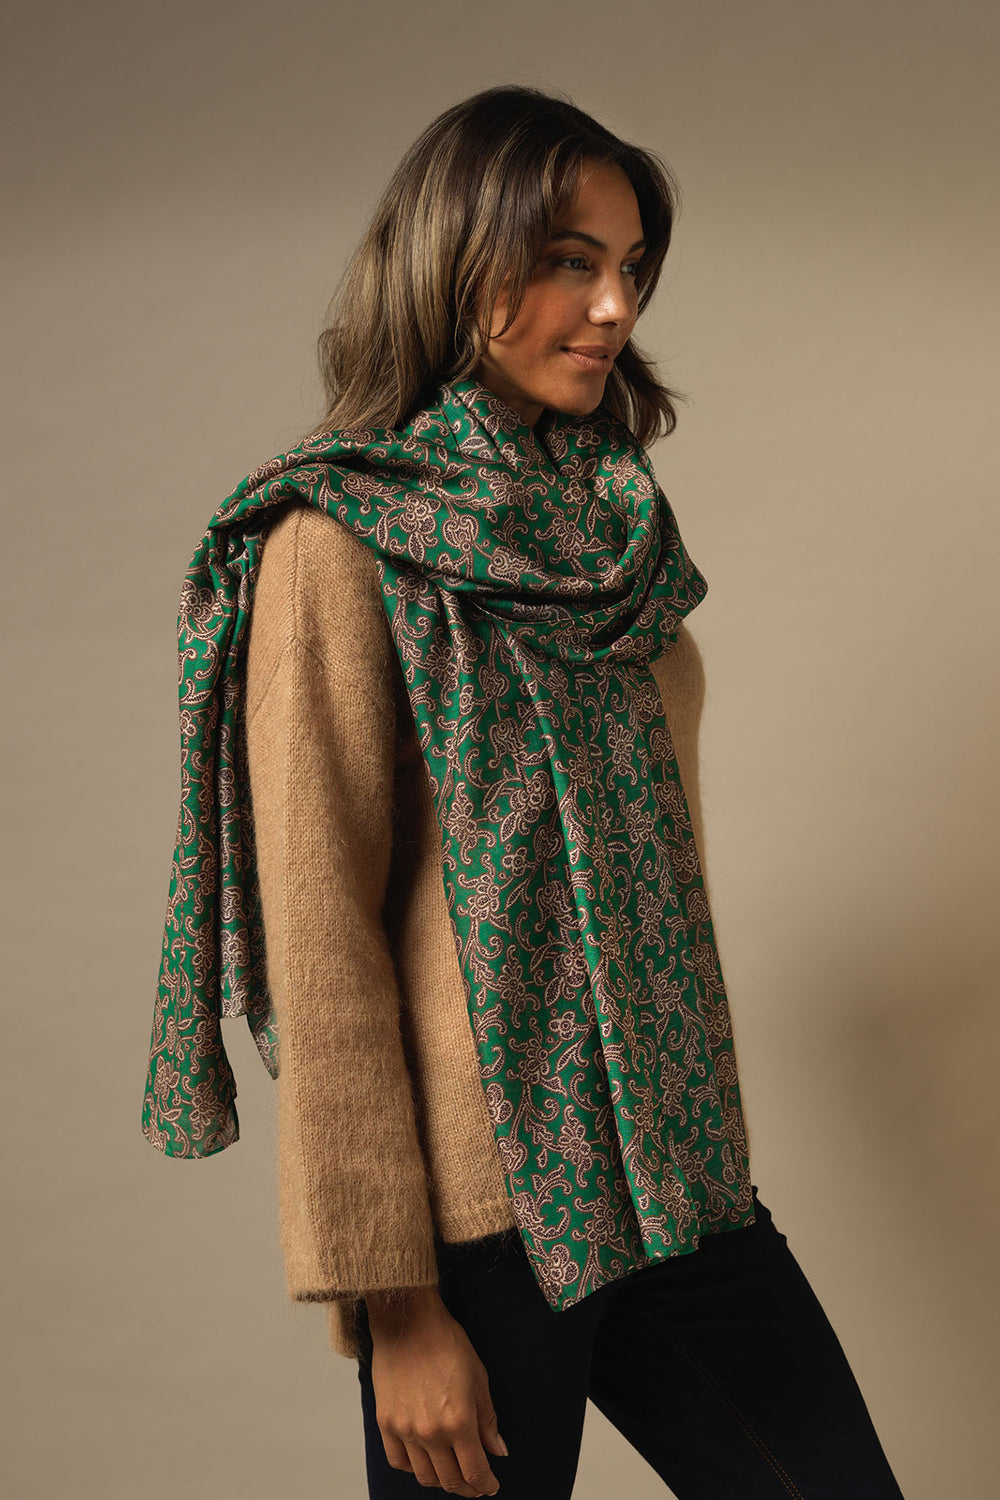 ladies large scarf  in green paisley print by One Hundred Stars